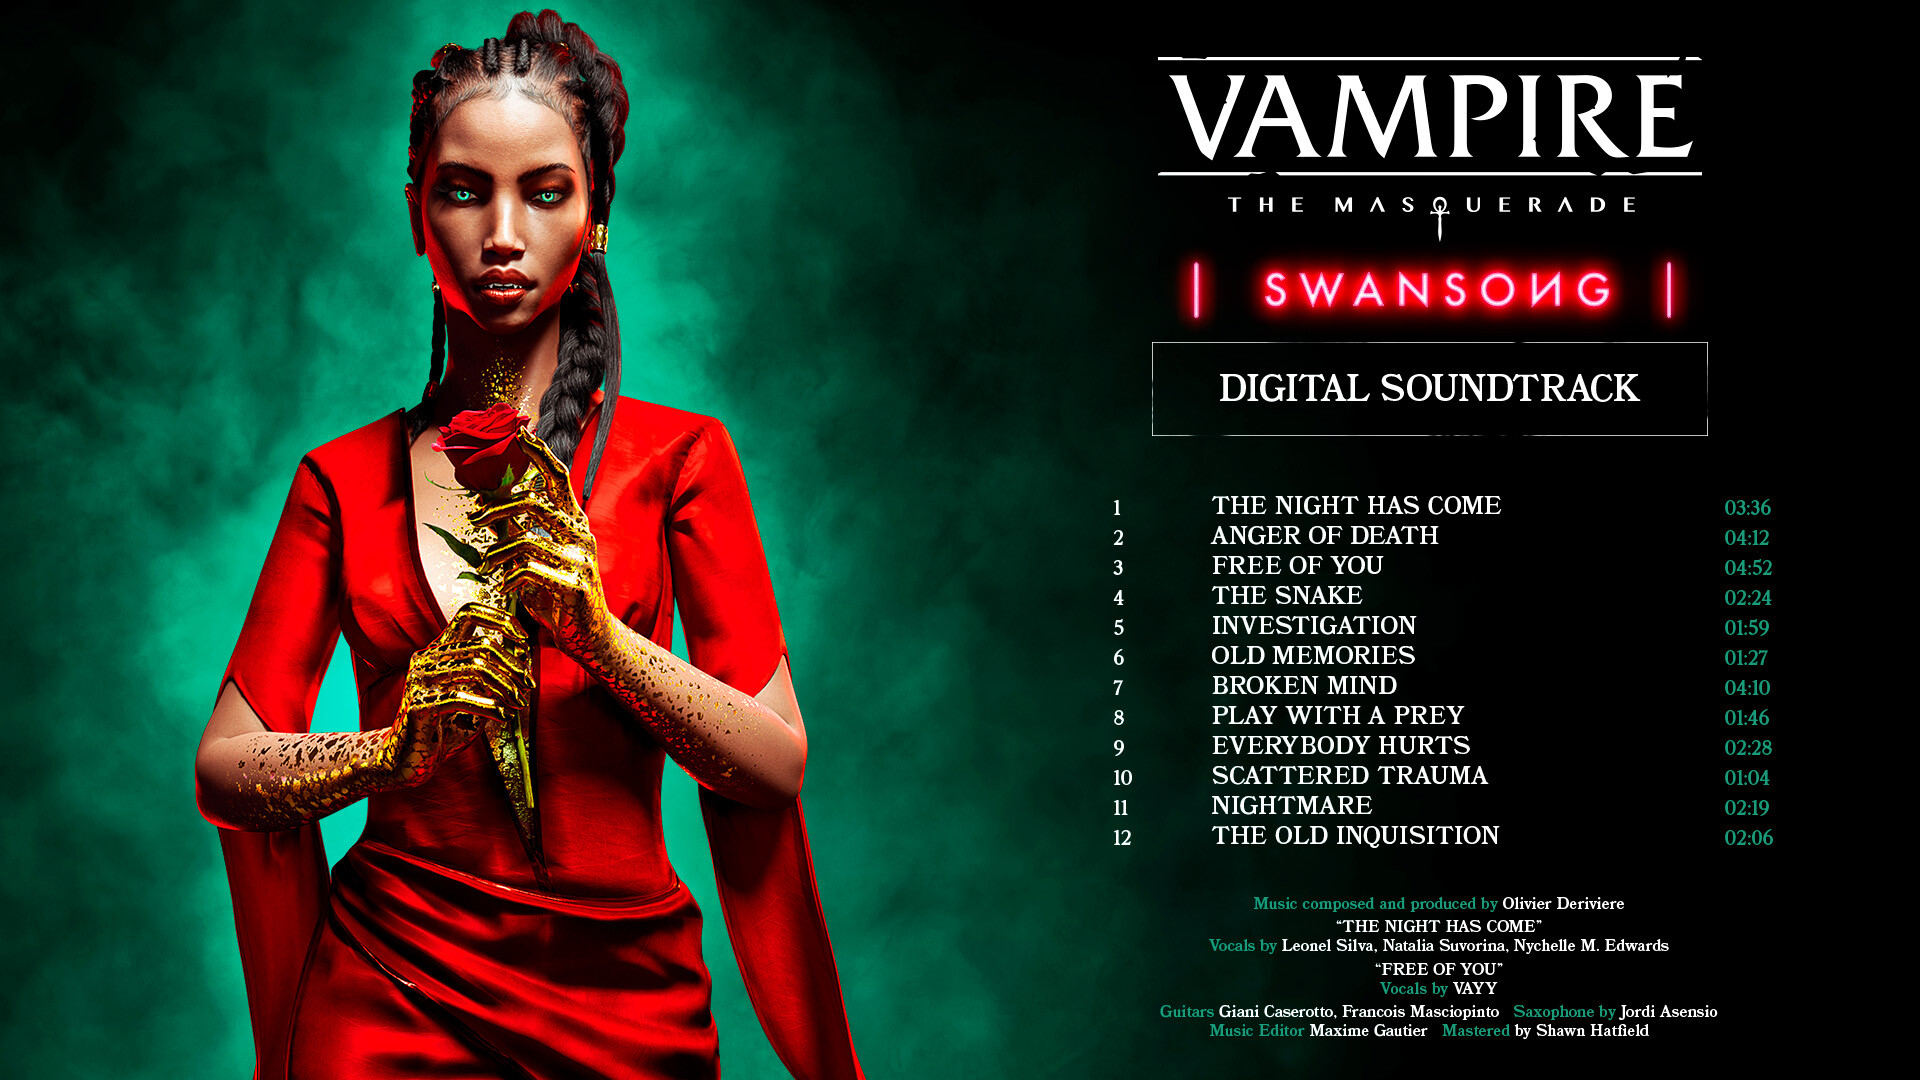 Vampire The Masquerade: Redemption Limited Edition Soundtrack - Music to  Feed By